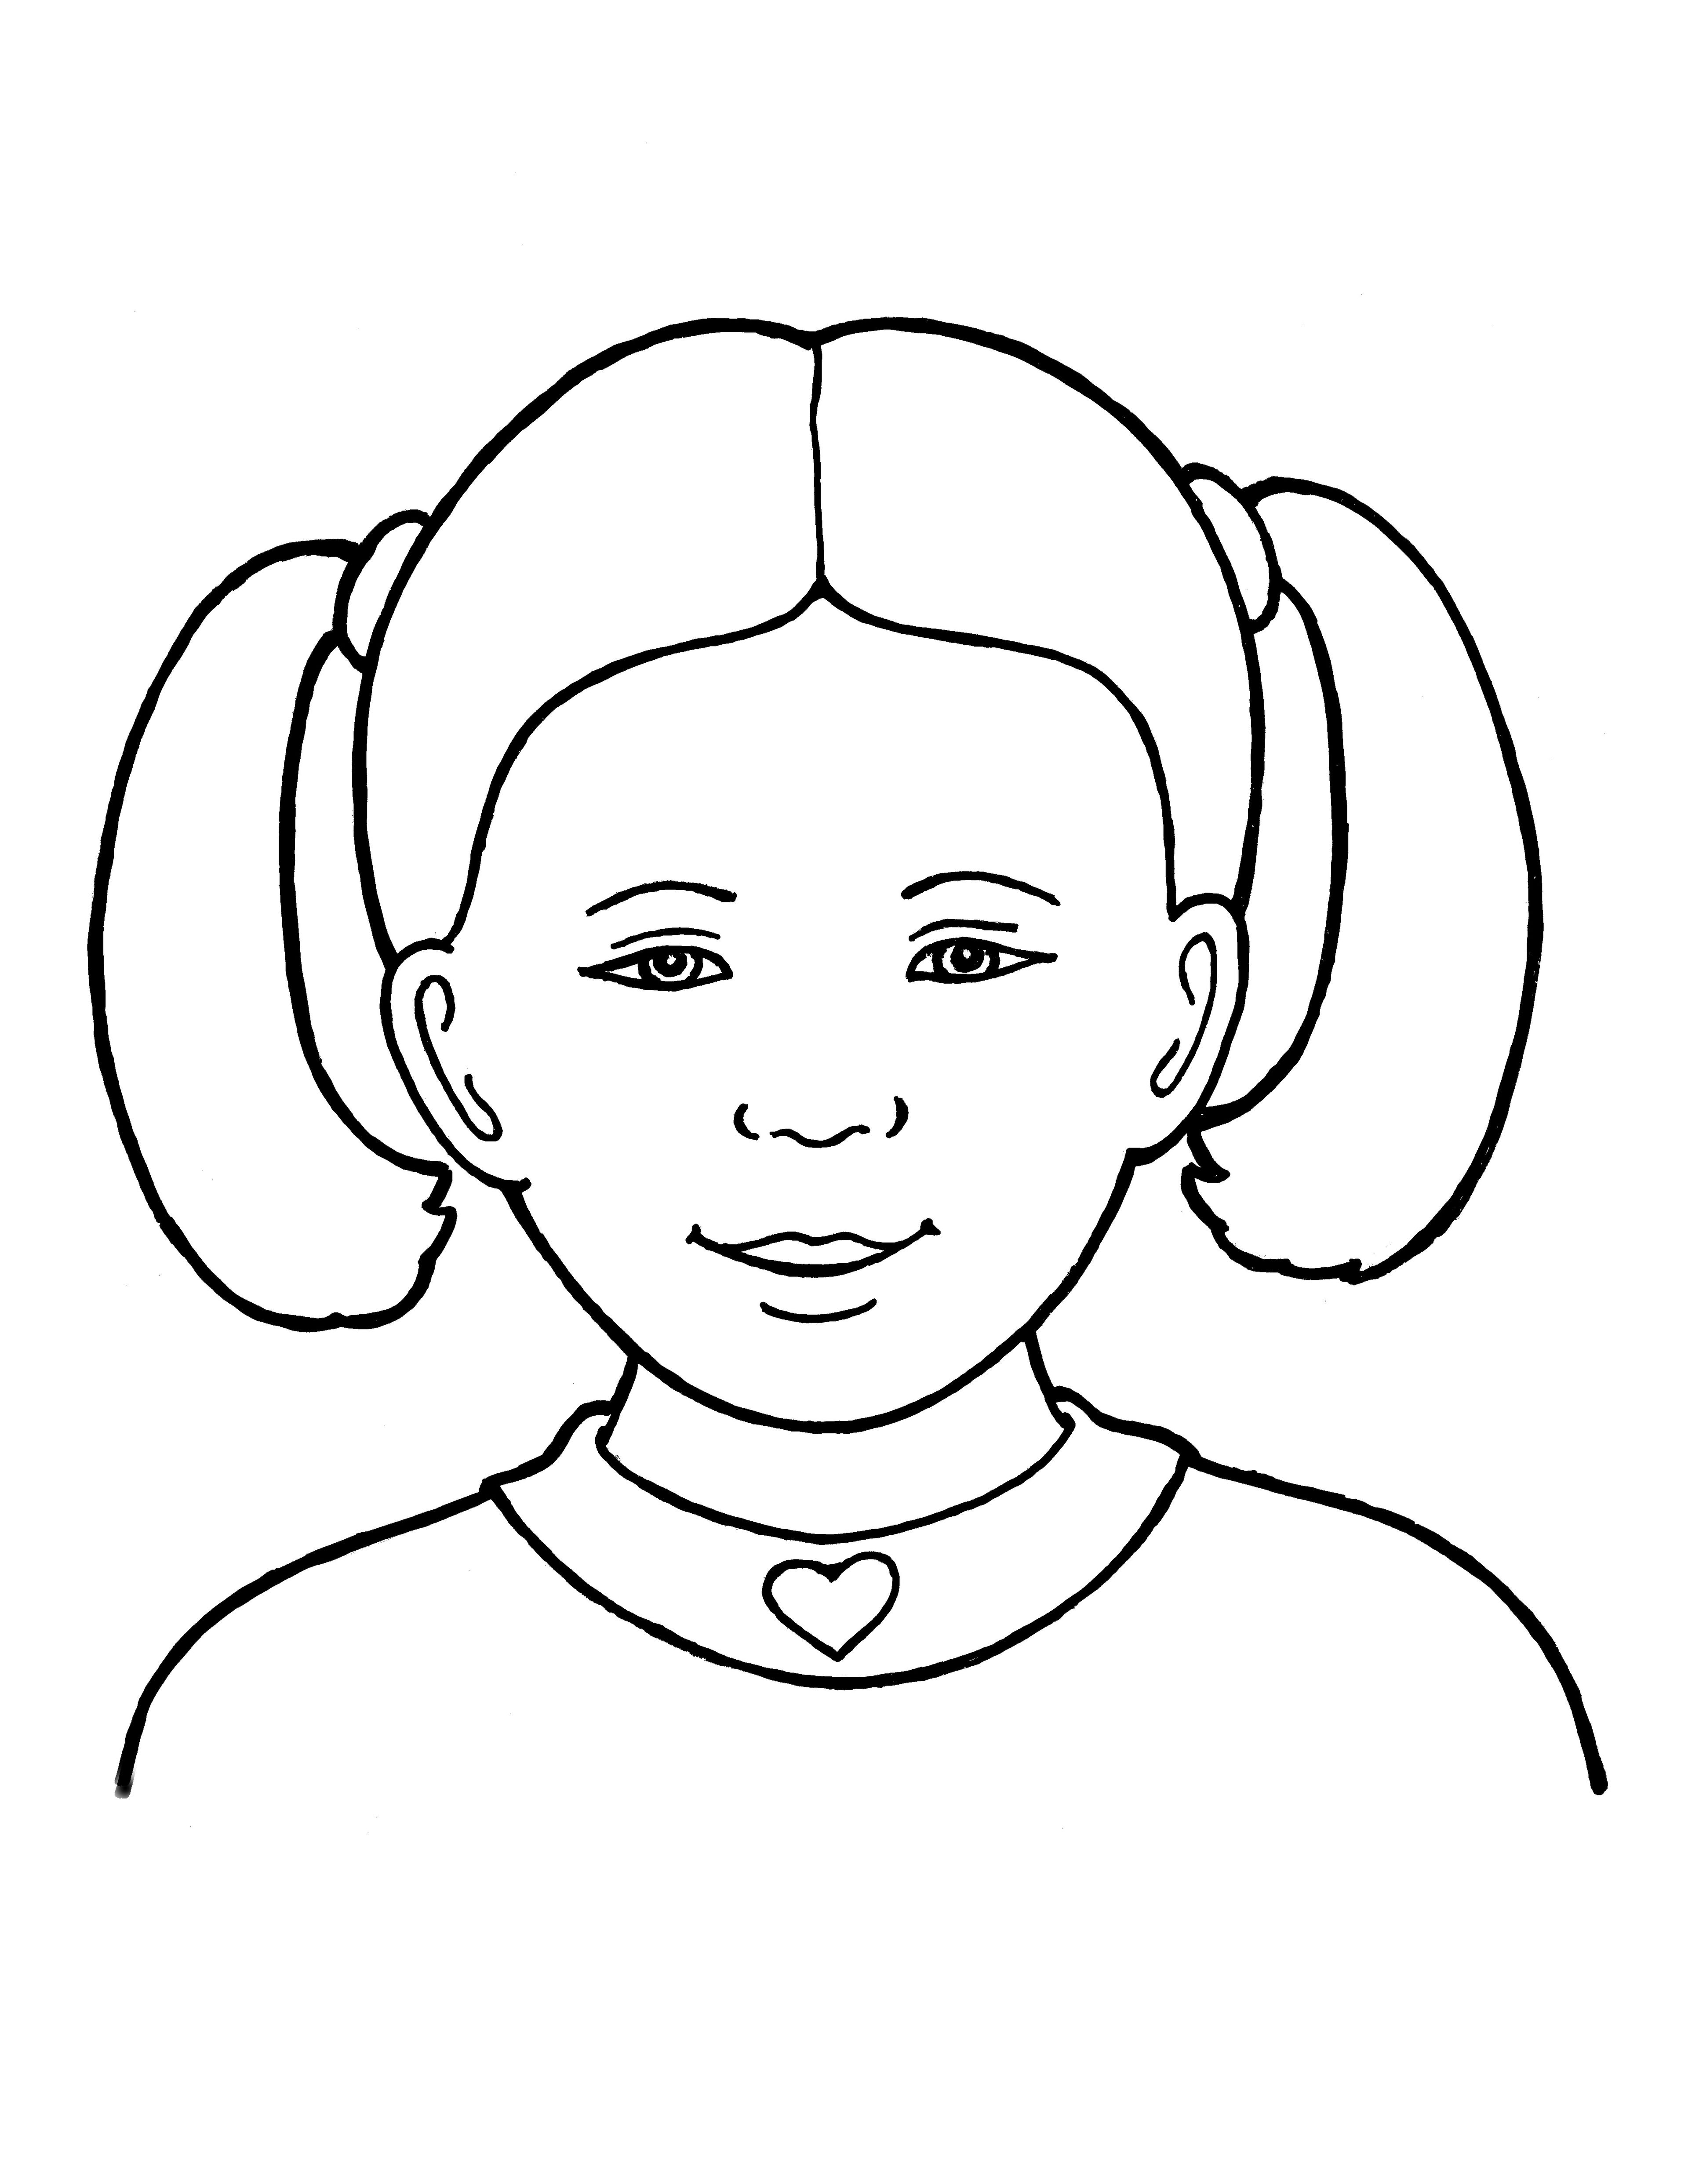 A line drawing of a Primary girl with pigtails, from the nursery manual Behold Your Little Ones (2008), page 71.